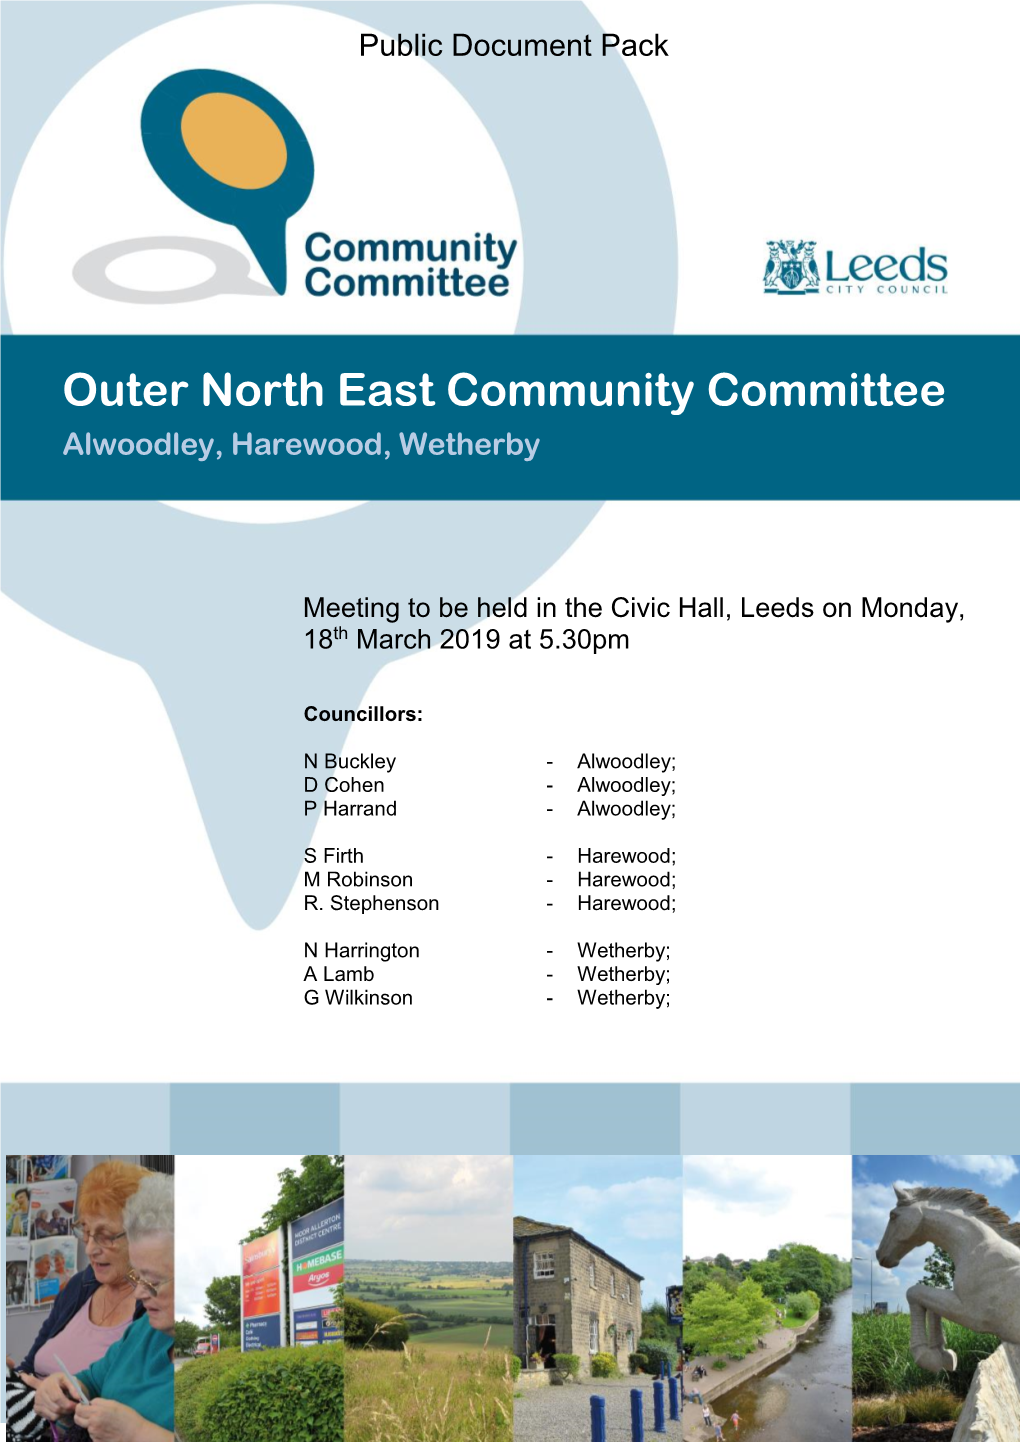 Outer North East Community Committee Alwoodley, Harewood, Wetherby